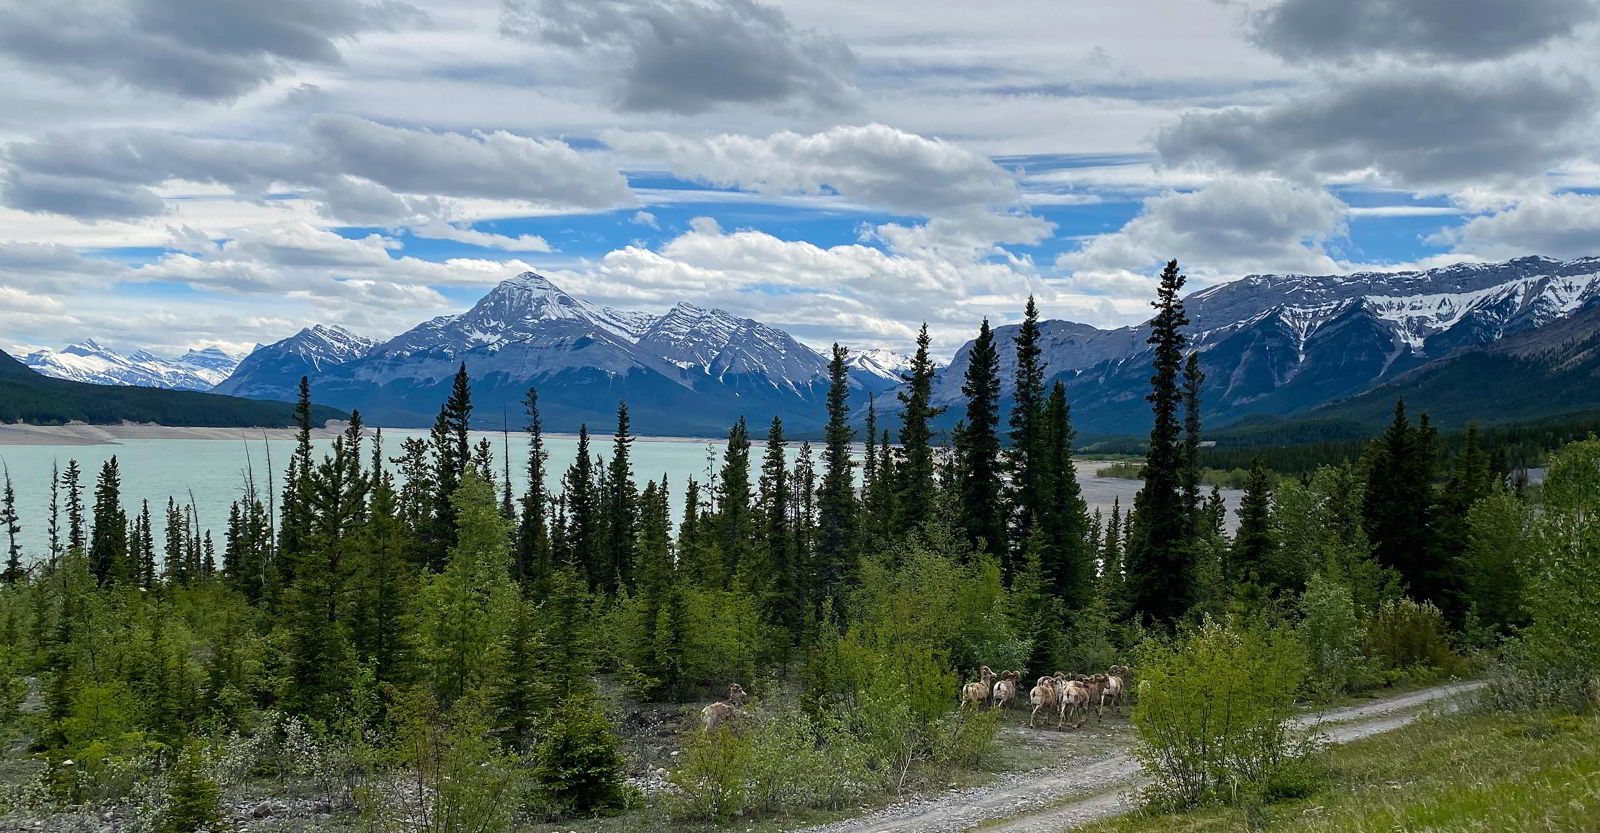 An image of Abraham Lake, one of the prettiest spots in the Canadian Rockies in Alberta, Canada.